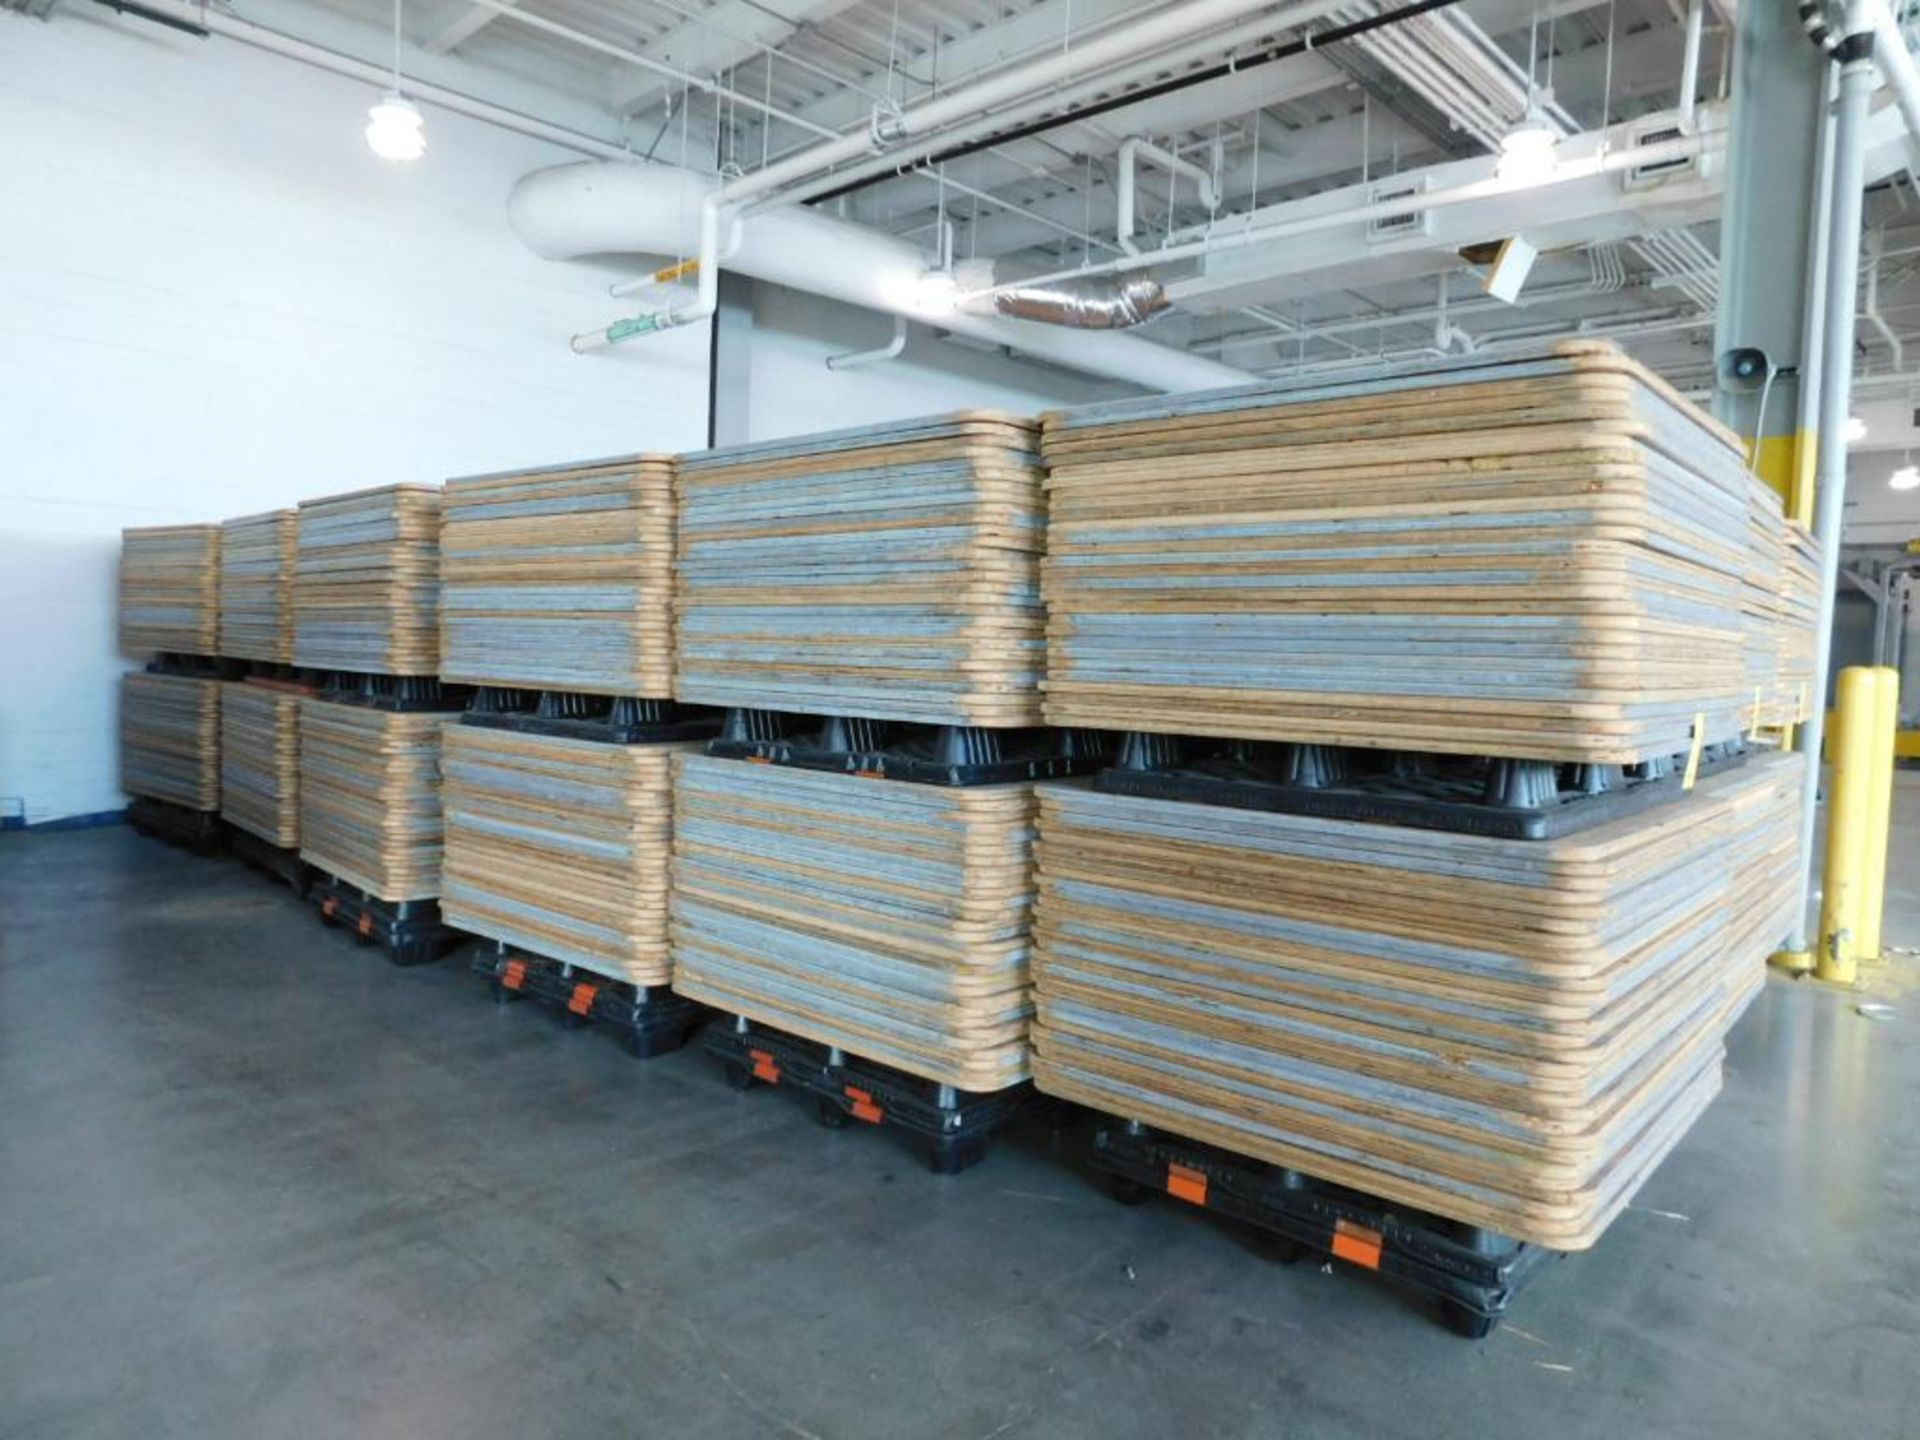 LOT: Large Quantity of 50" x 50" Wood Paper Roll Pallets on (12) Plastic Pallets (LOCATION: IN MAIL - Image 2 of 8